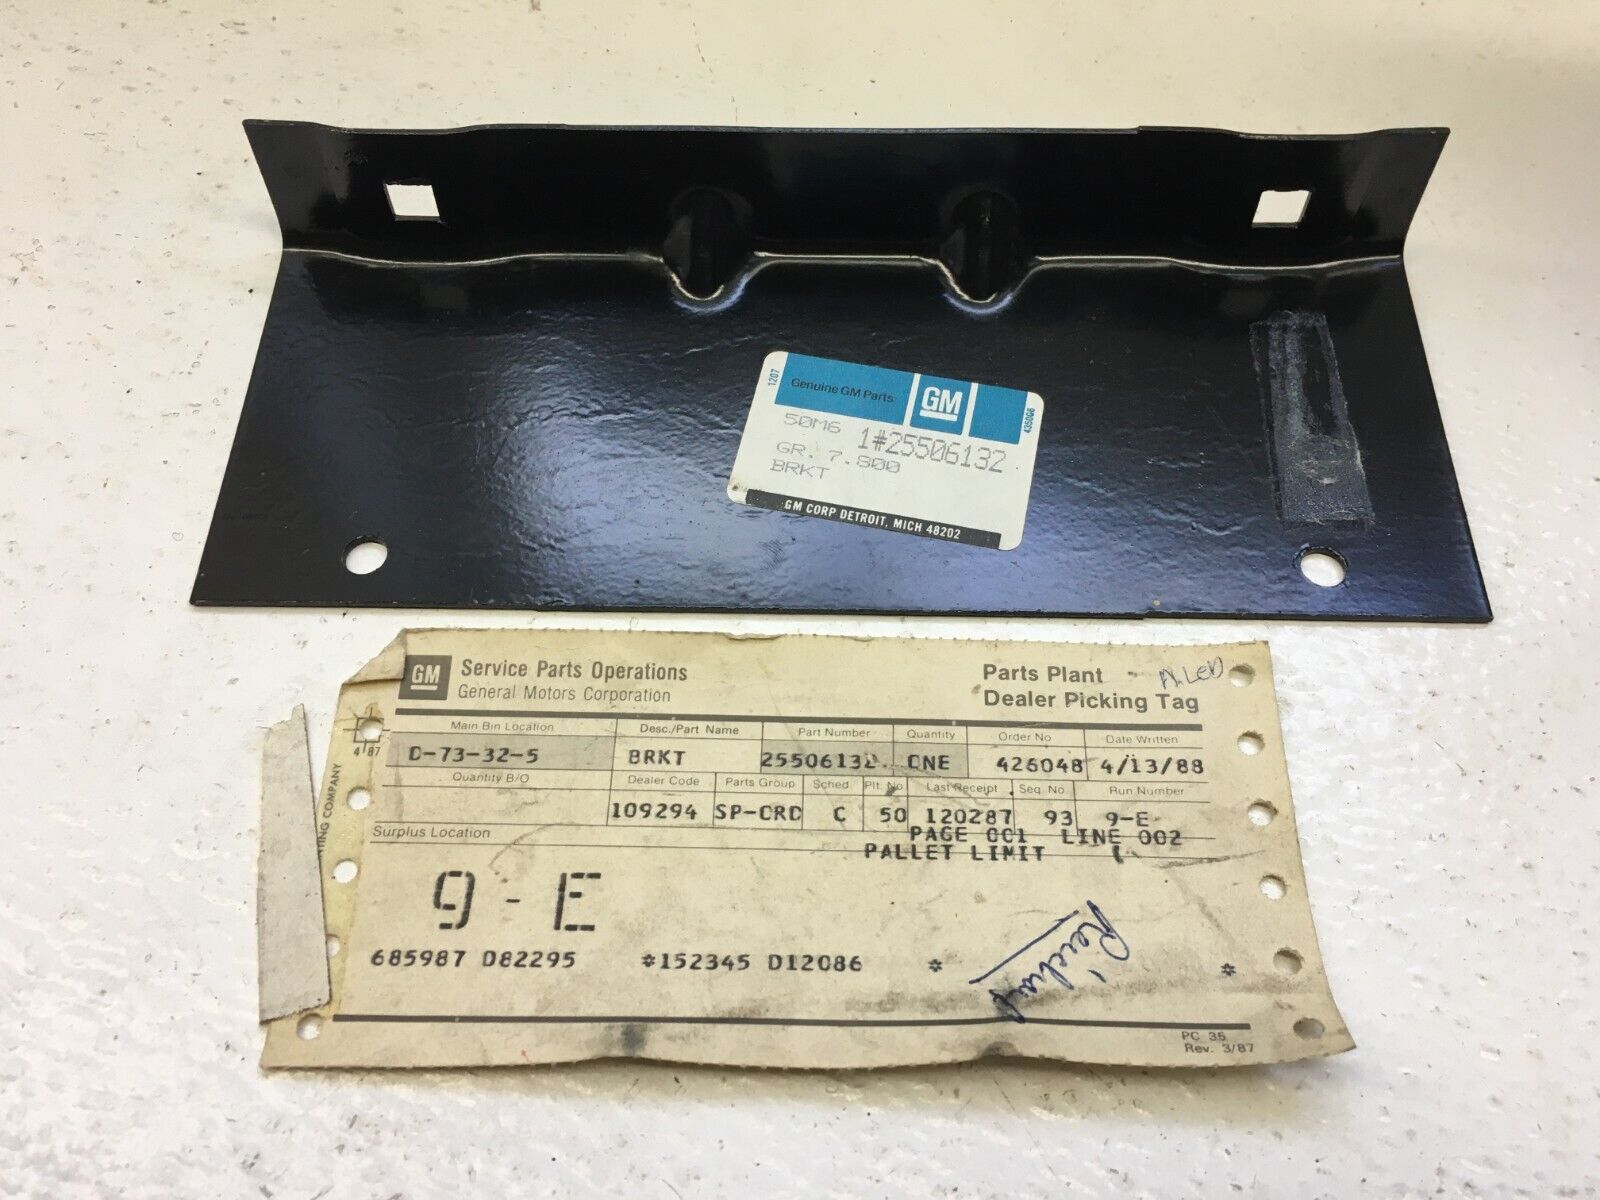 Rare GM NOS 1981-87 Buick Regal Grand National Front License Plate Bracket